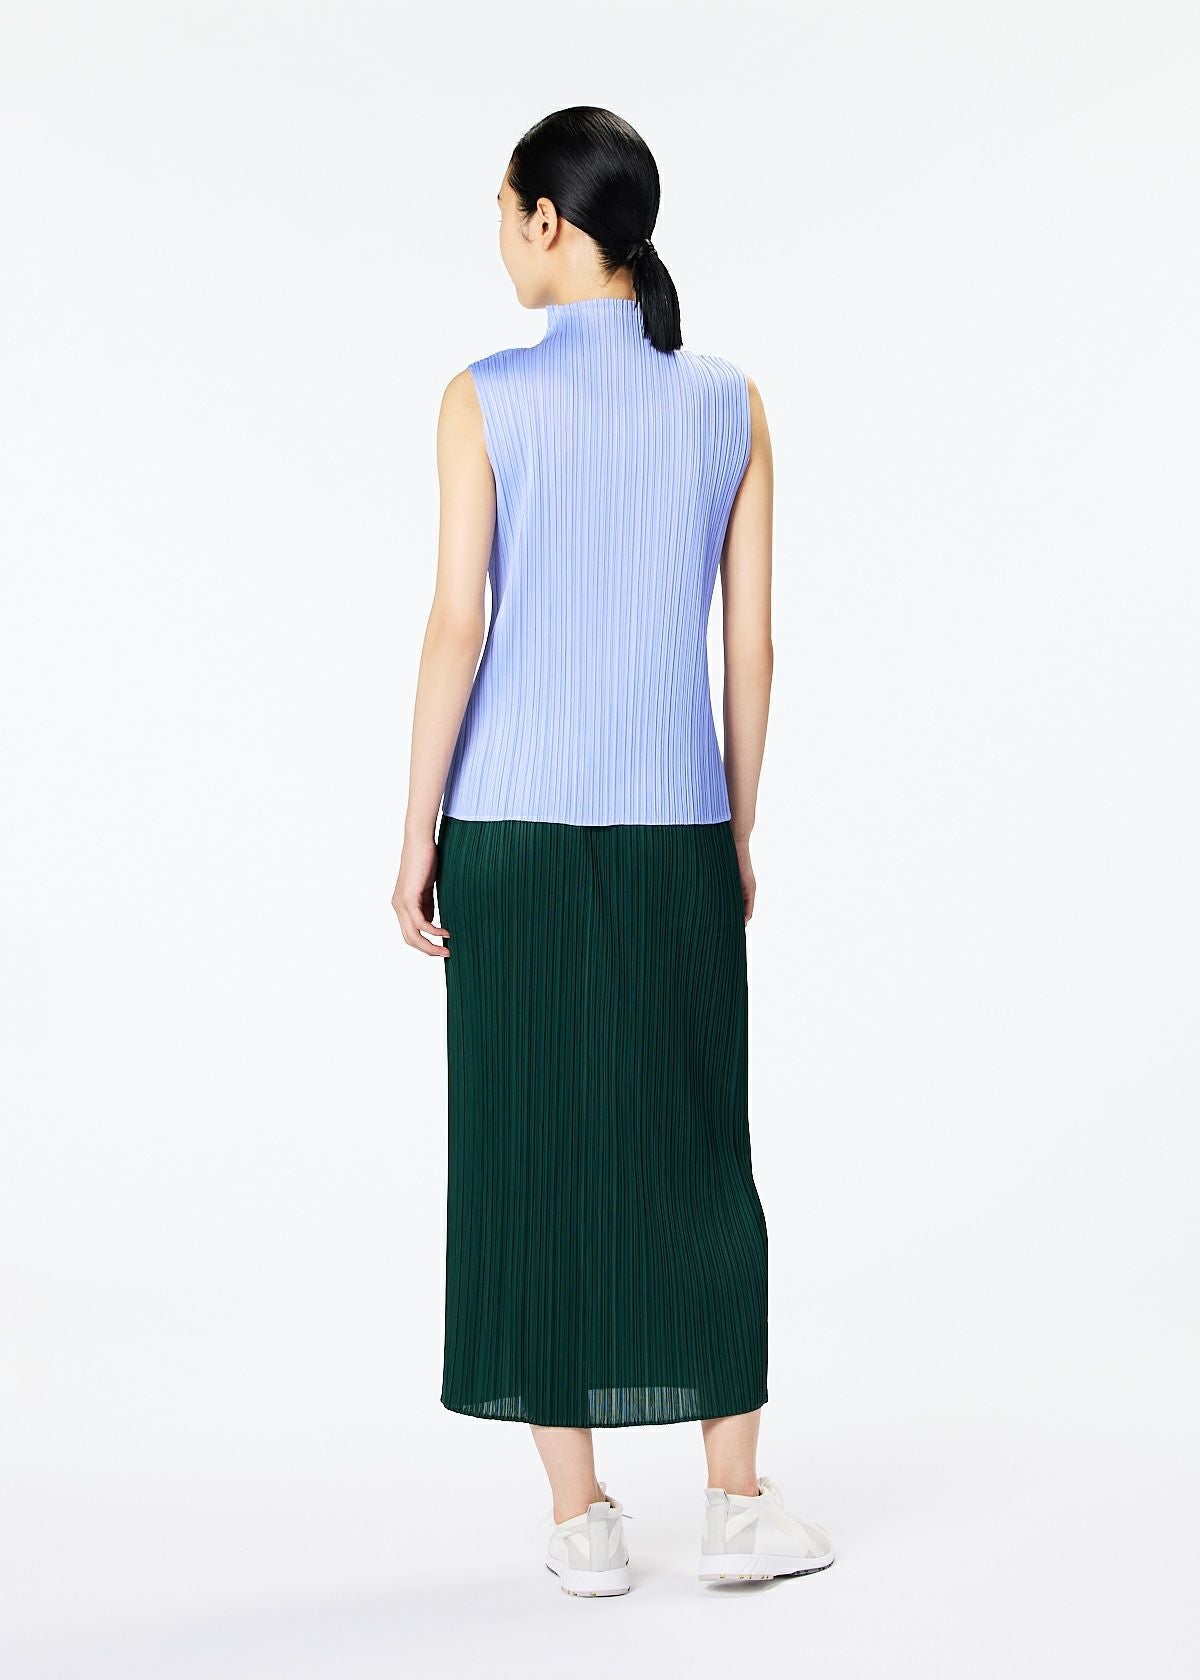 NEW COLORFUL BASICS 3 TOP | The official ISSEY MIYAKE ONLINE STORE 